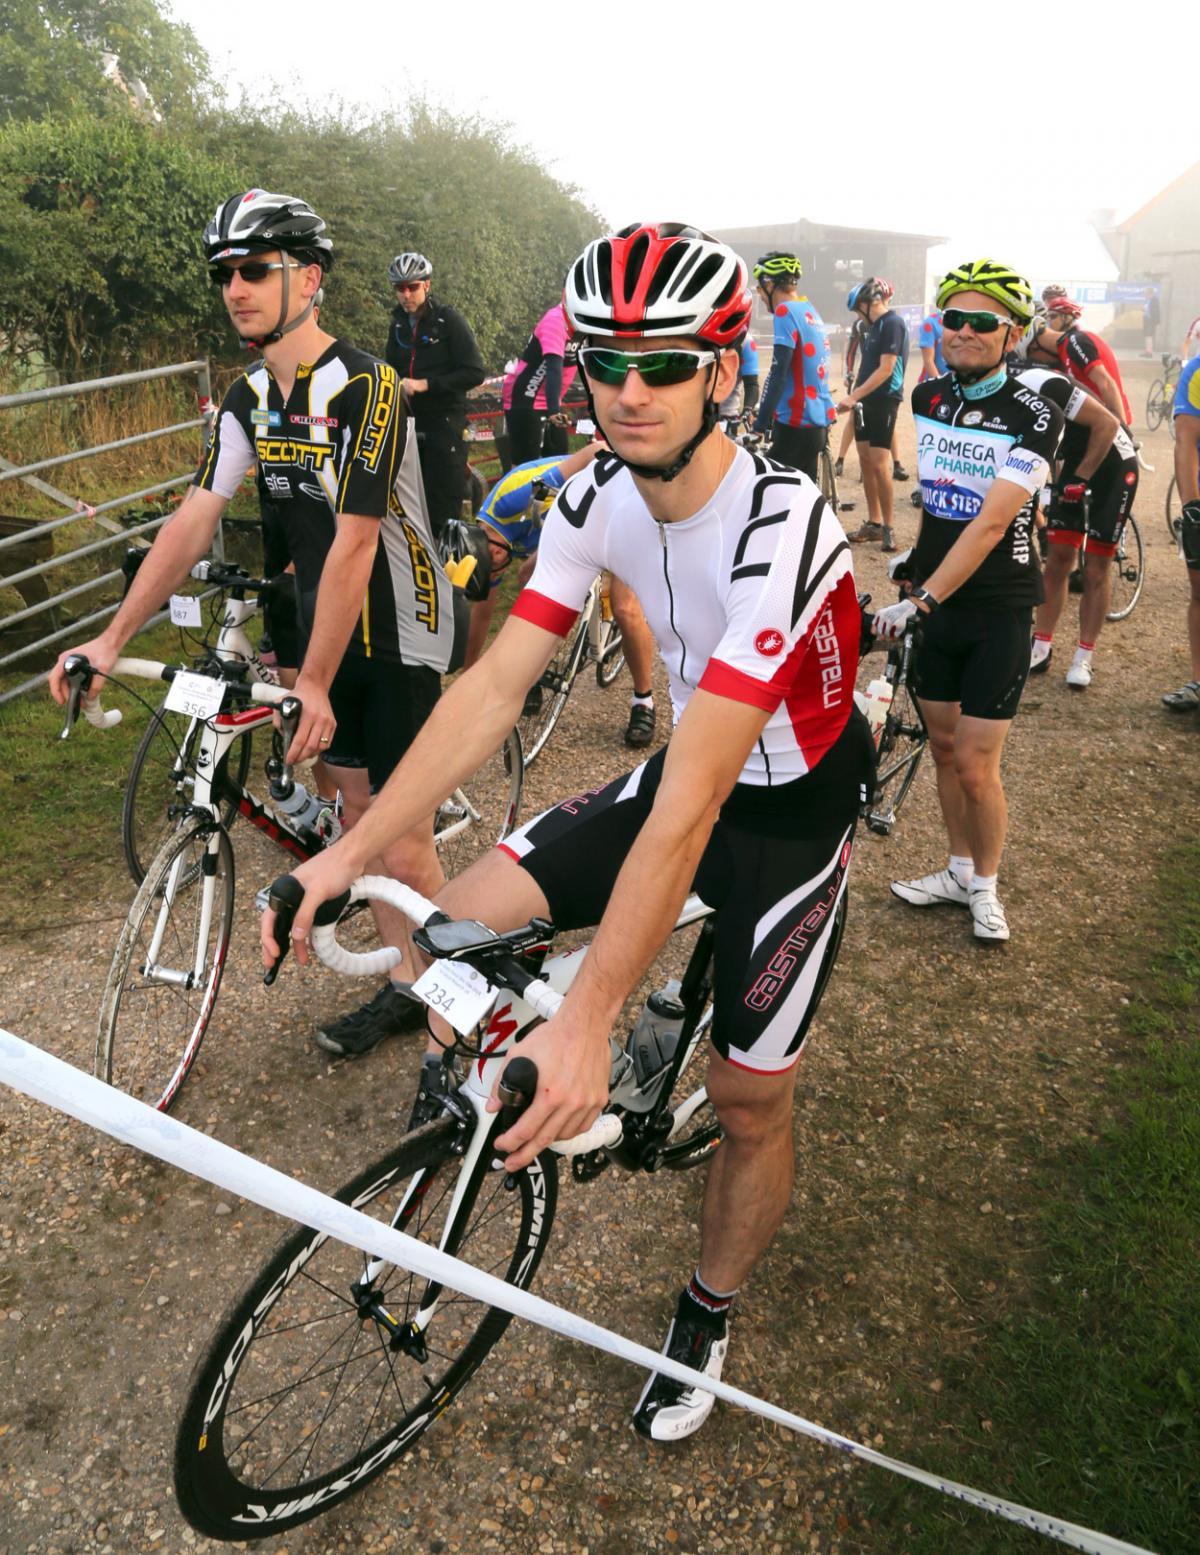 All our pictures of the Rotary Dorset Bike Ride on Sunday, September 7 2014. Photos by Richard Crease. 